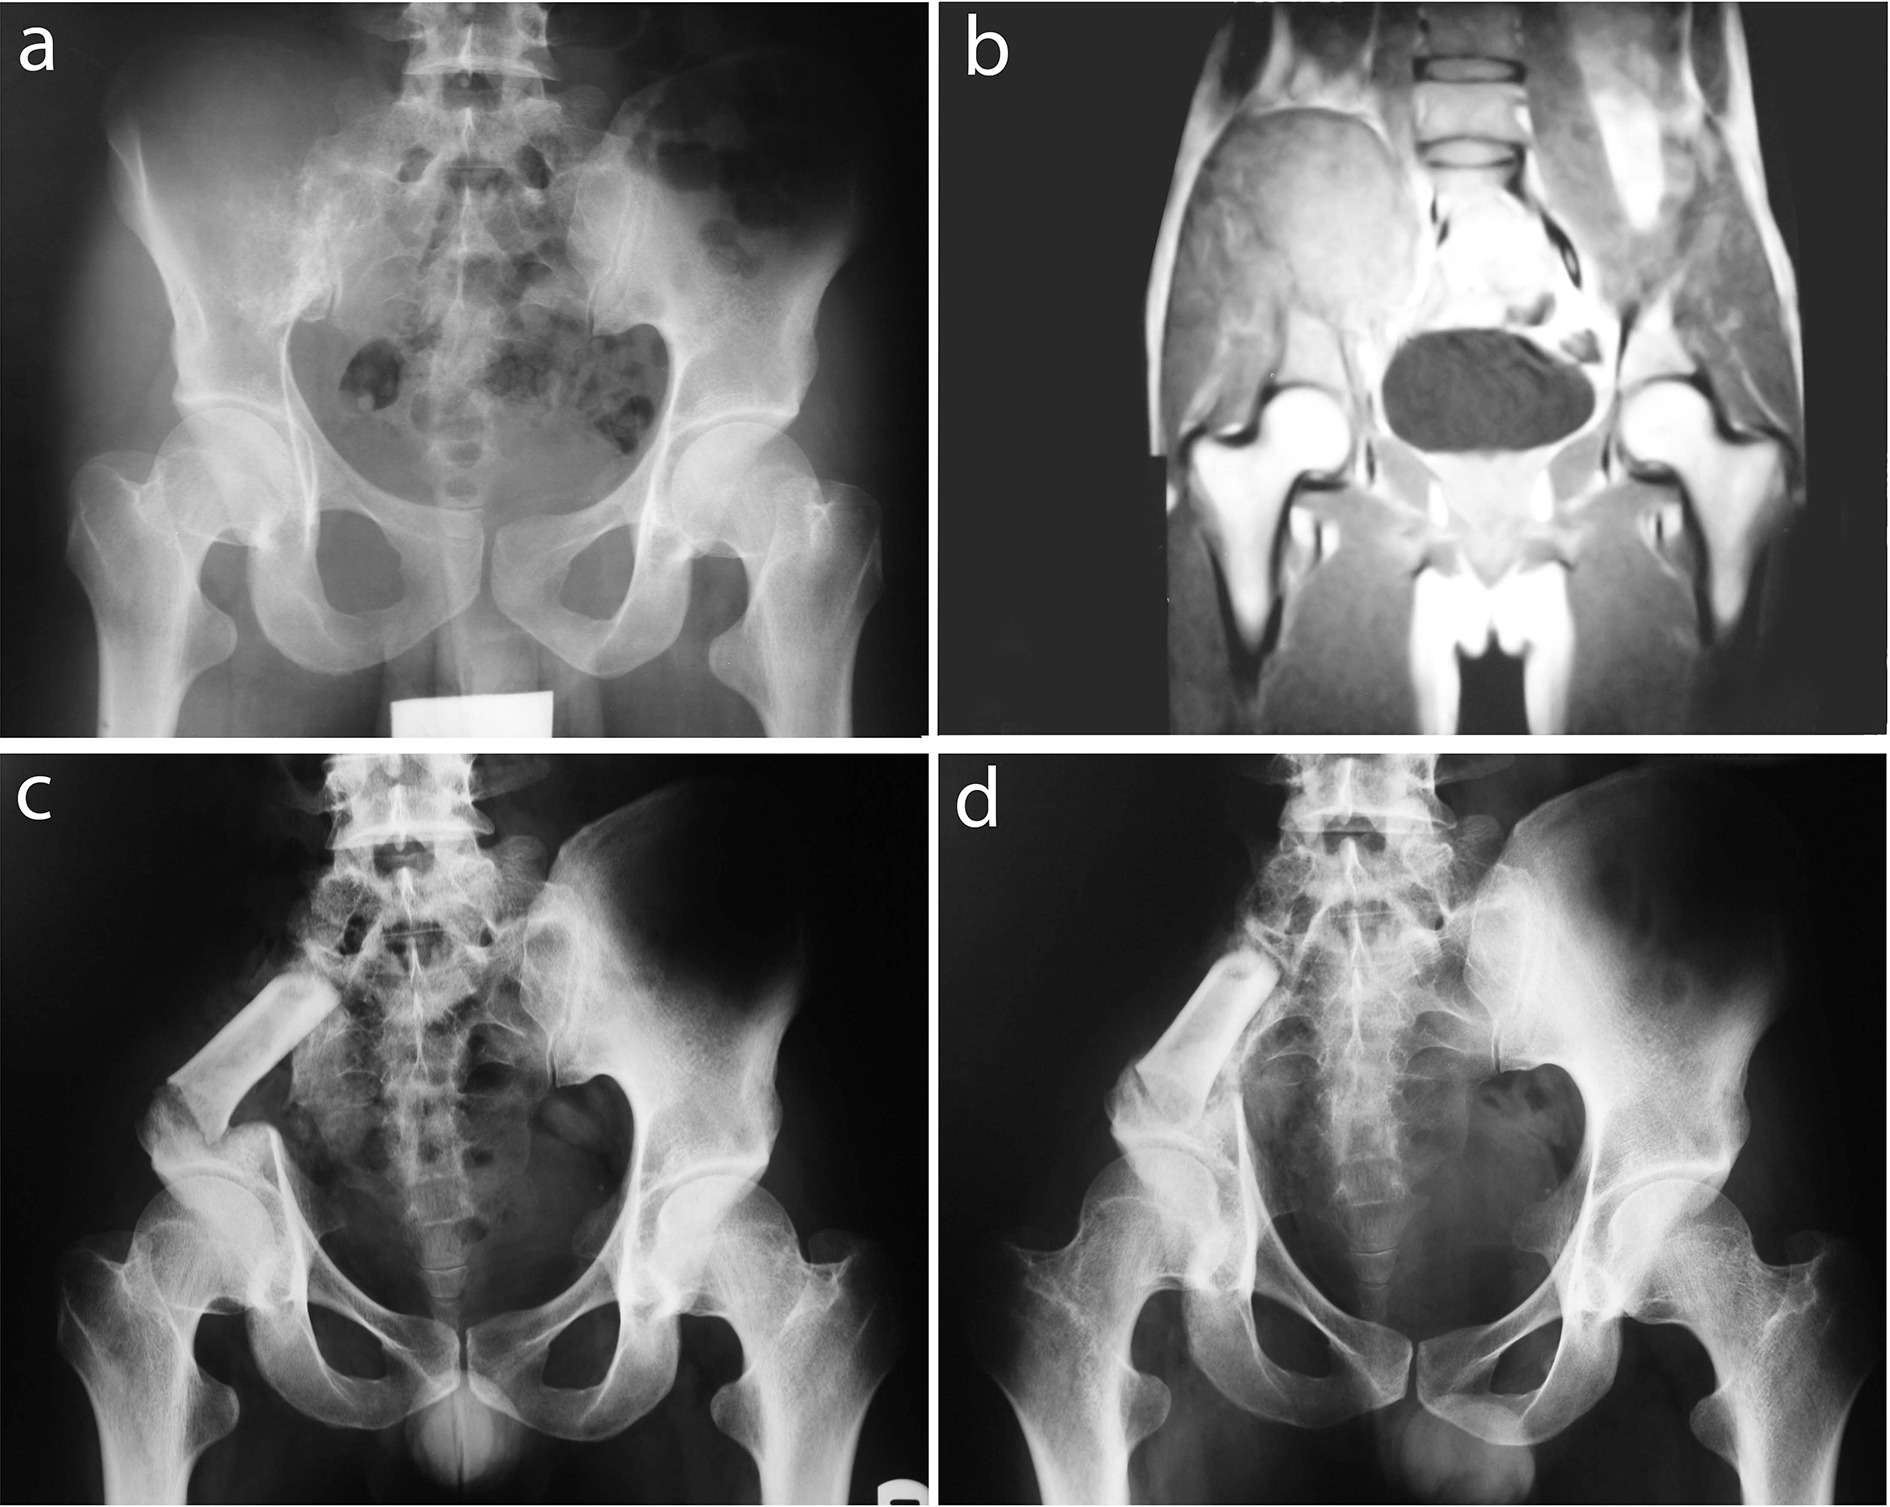 Fig. 4 
            a) Anteroposterior radiograph of the hip showing pre-chemotherapy Ewing’s sarcoma of the ilium in a 23-year-old male. b) T1-weighted MRI of the hip showing the tumour extension close to the sacroiliac joint (Zone I3 resection). c) Anteroposterior radiograph of the hip six months after surgical resection and reconstruction with tibial strut graft. d) Anteroposterior radiograph of the hip three years after surgical resection and reconstruction, showing the complete incorporation of the graft into the host bone.
          